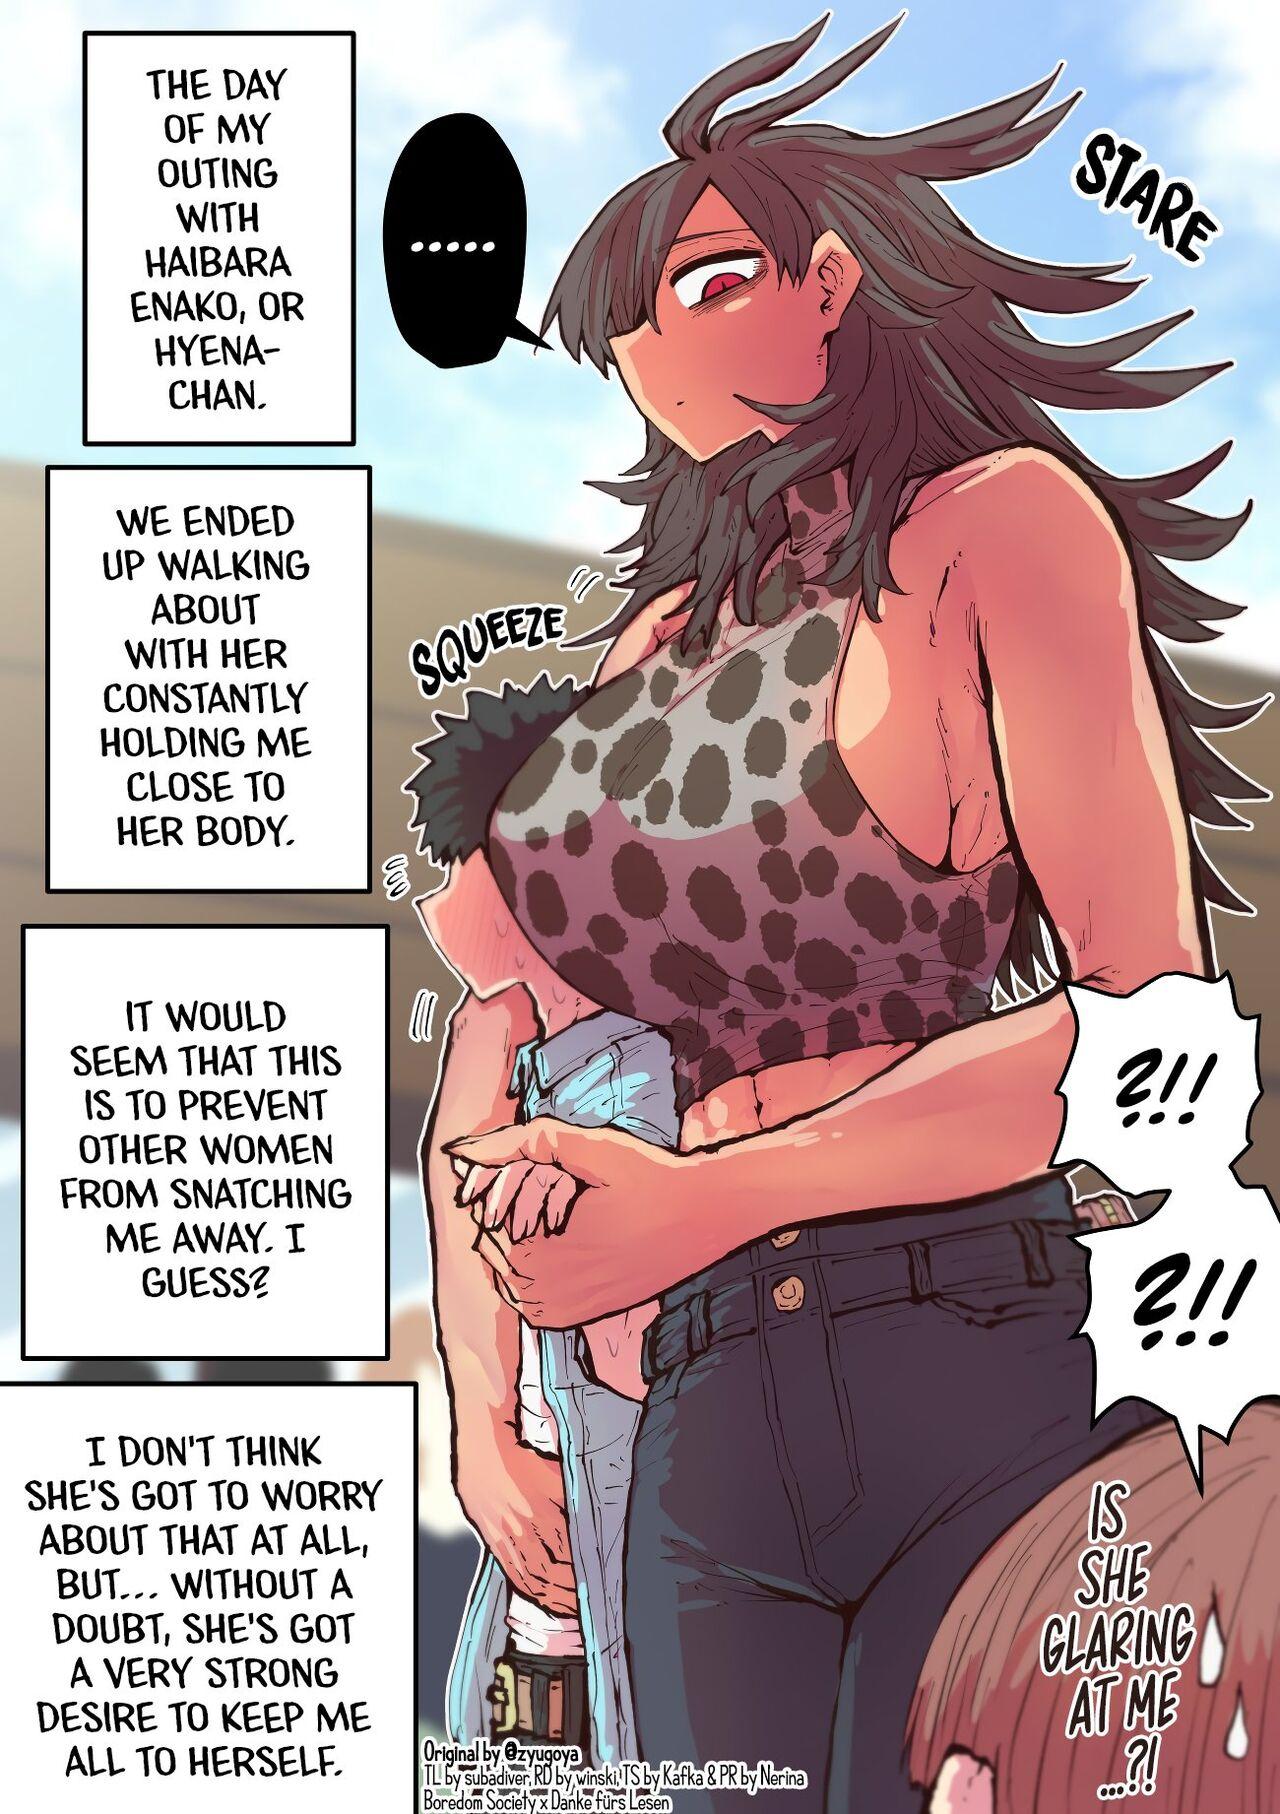 Smoking Being Targeted by Hyena-chan Watersports - Page 8